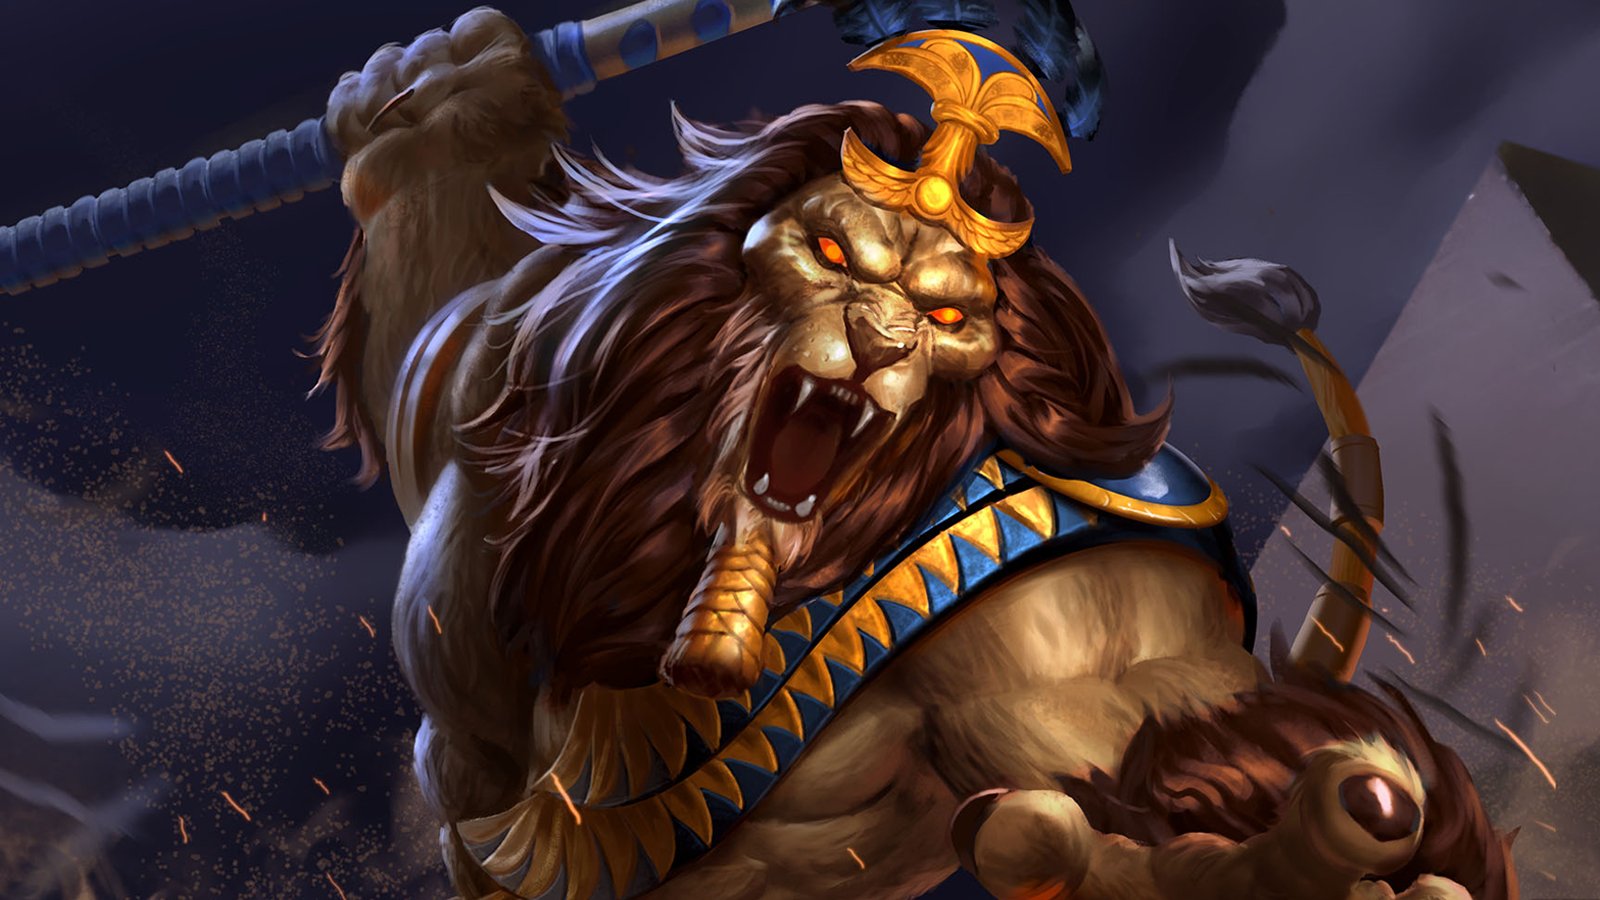 Smite 2 item changes: All item buffs, nerfs, and changes in Smite 2 alpha